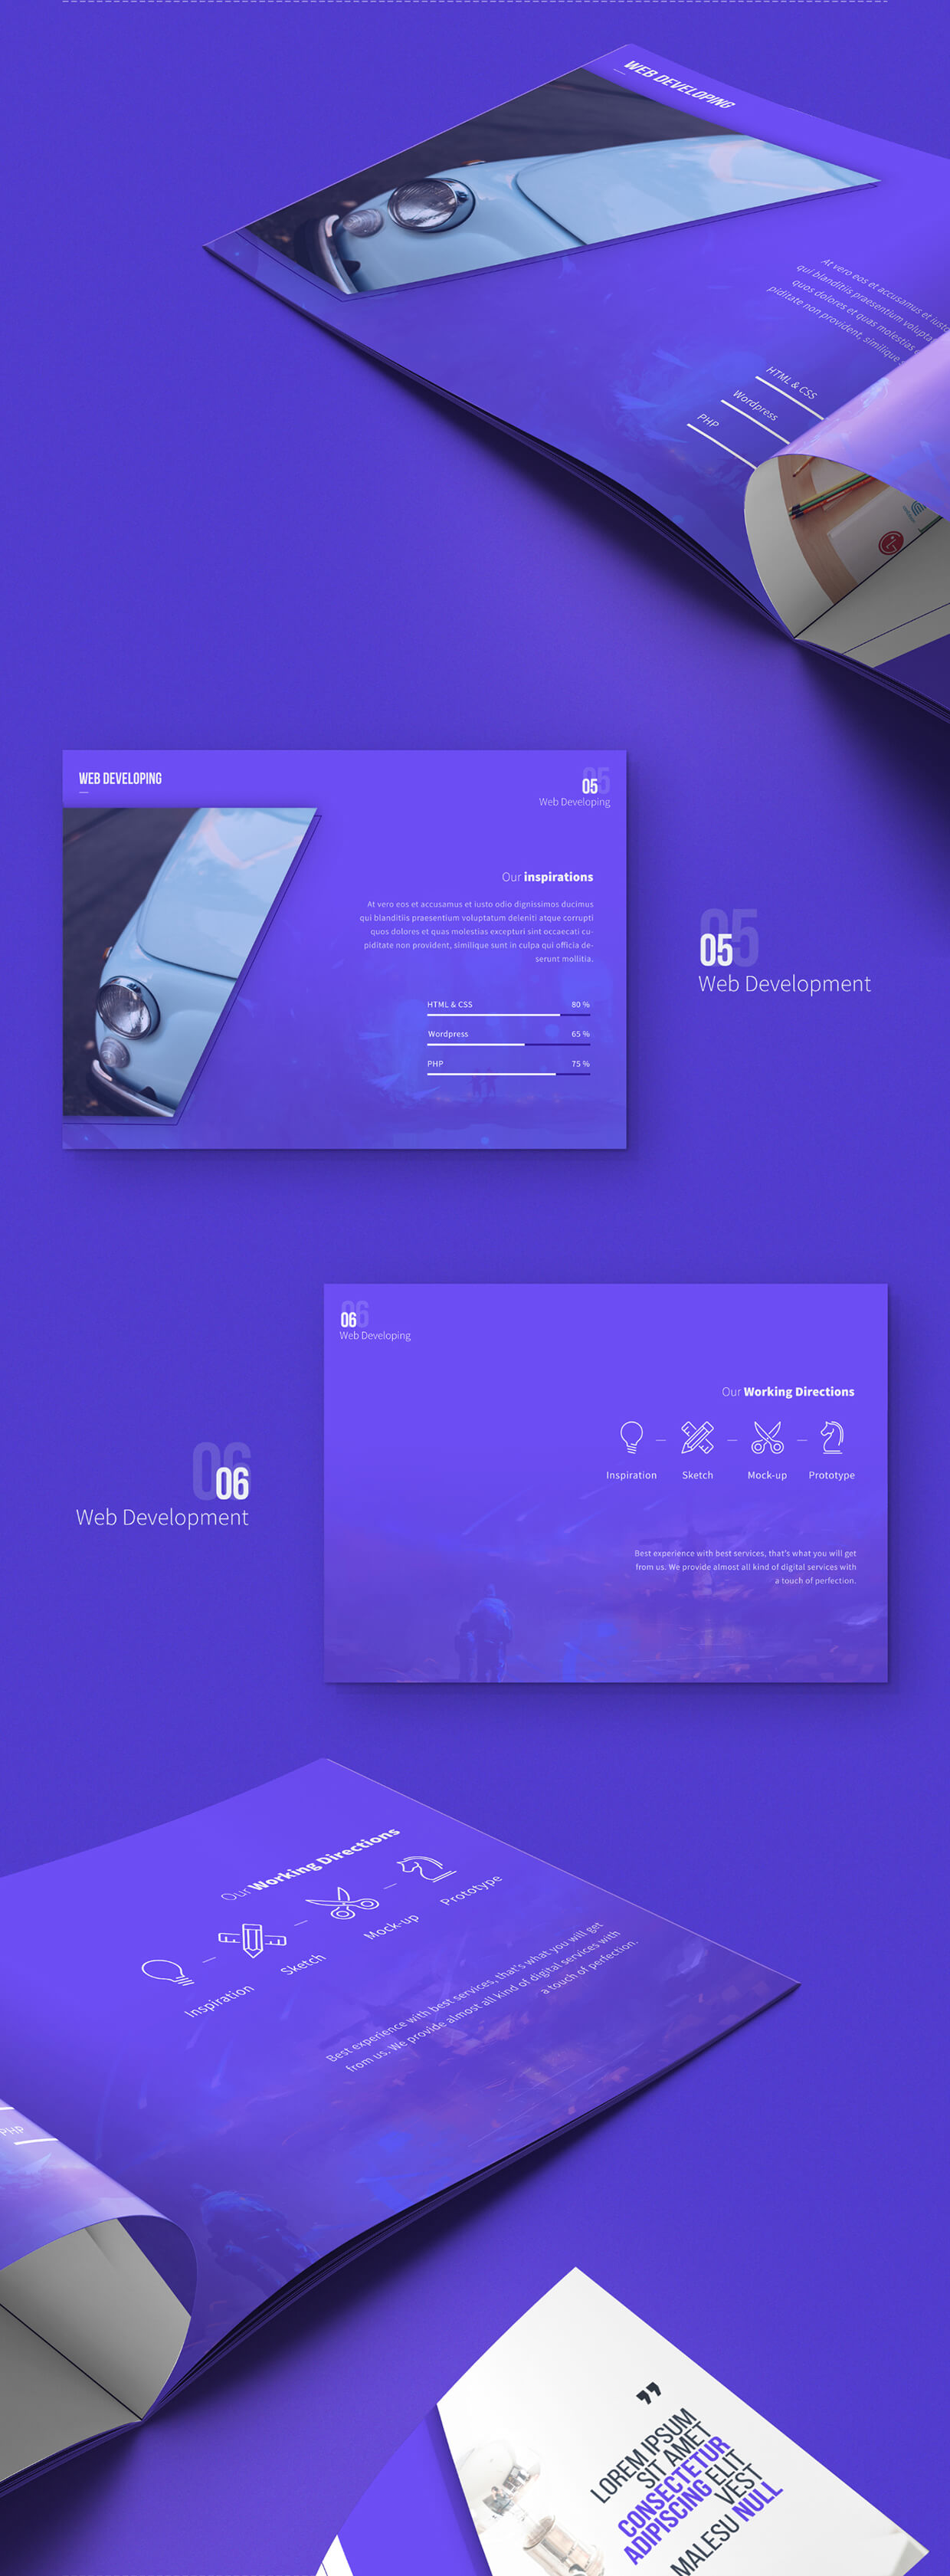 carsive 18 pages brochures template 02 (1)